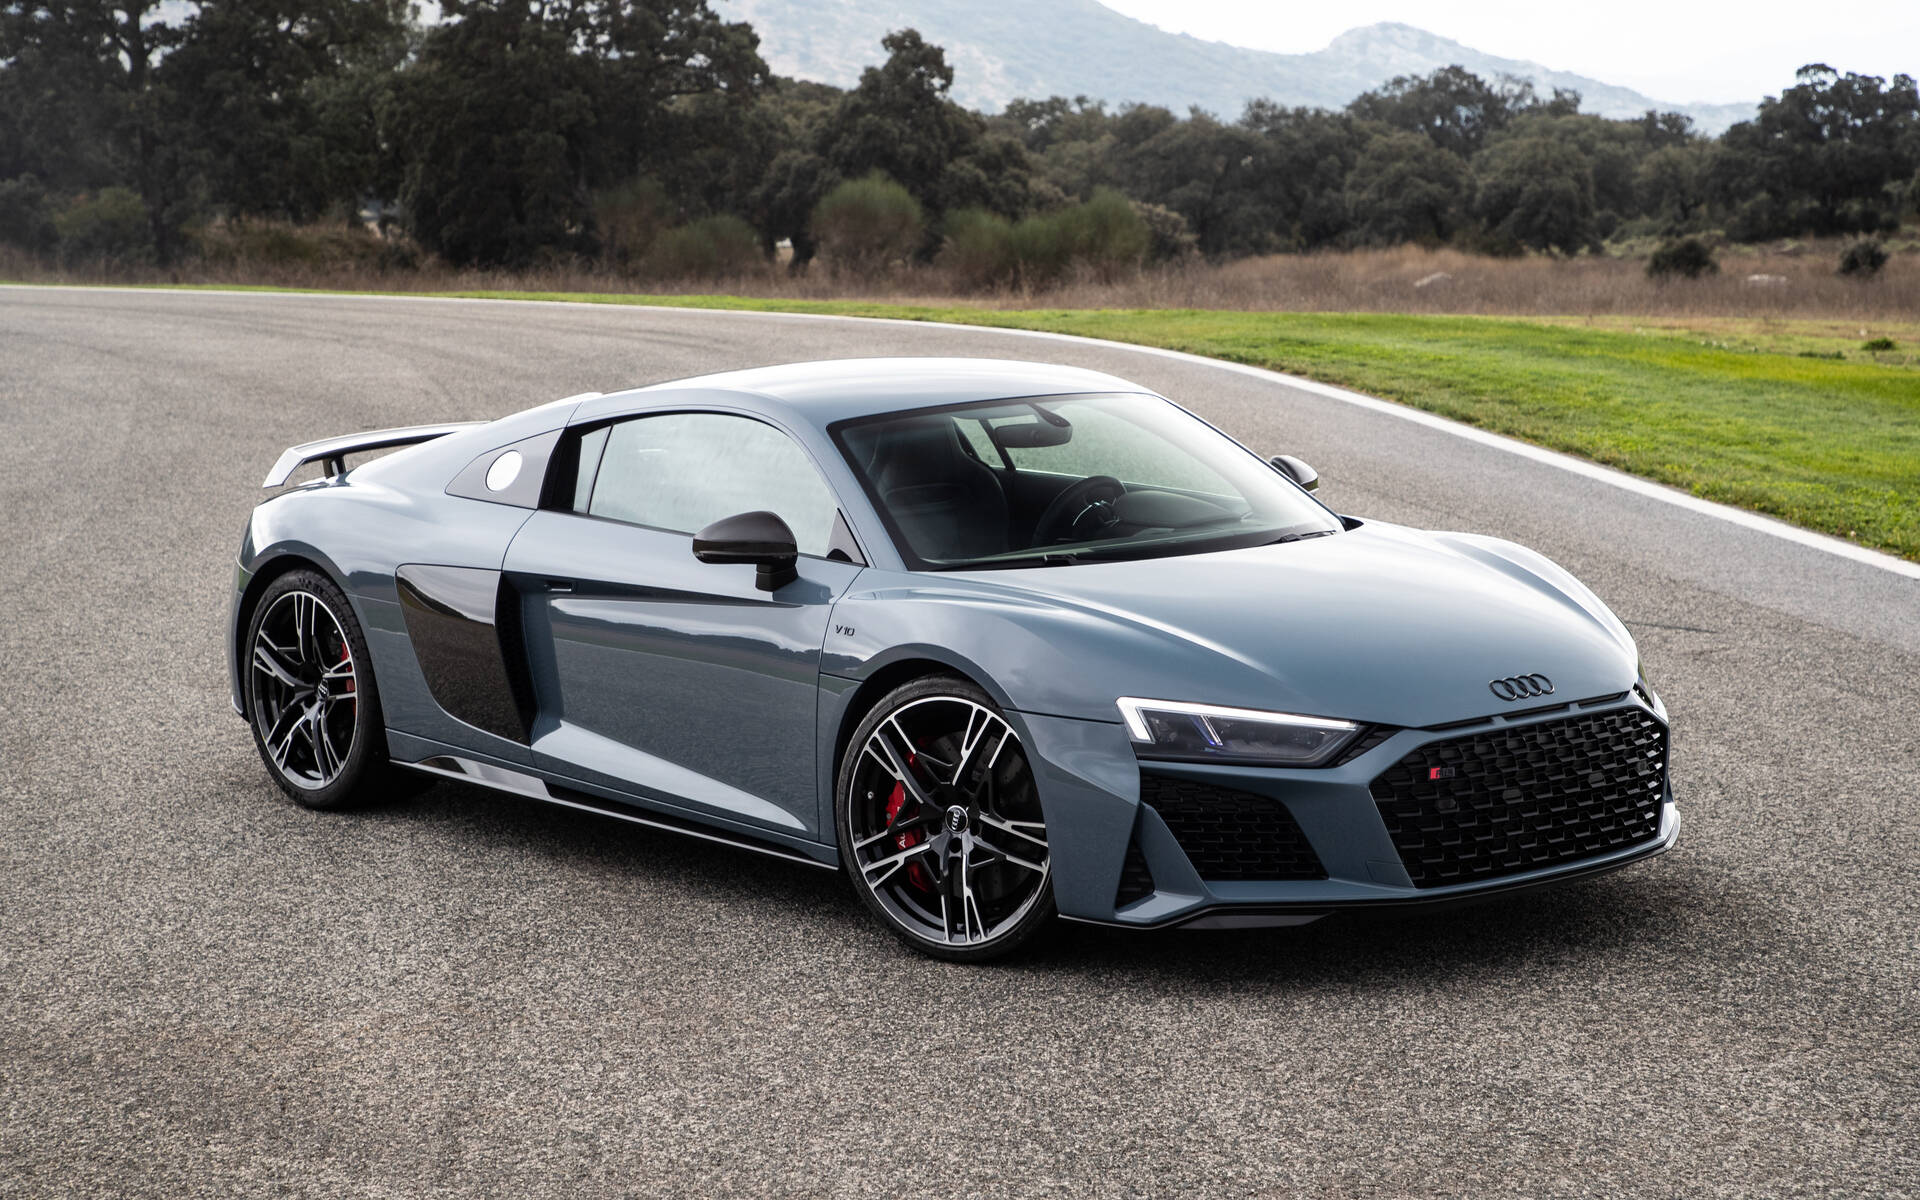 22 Audi R8 News Reviews Picture Galleries And Videos The Car Guide